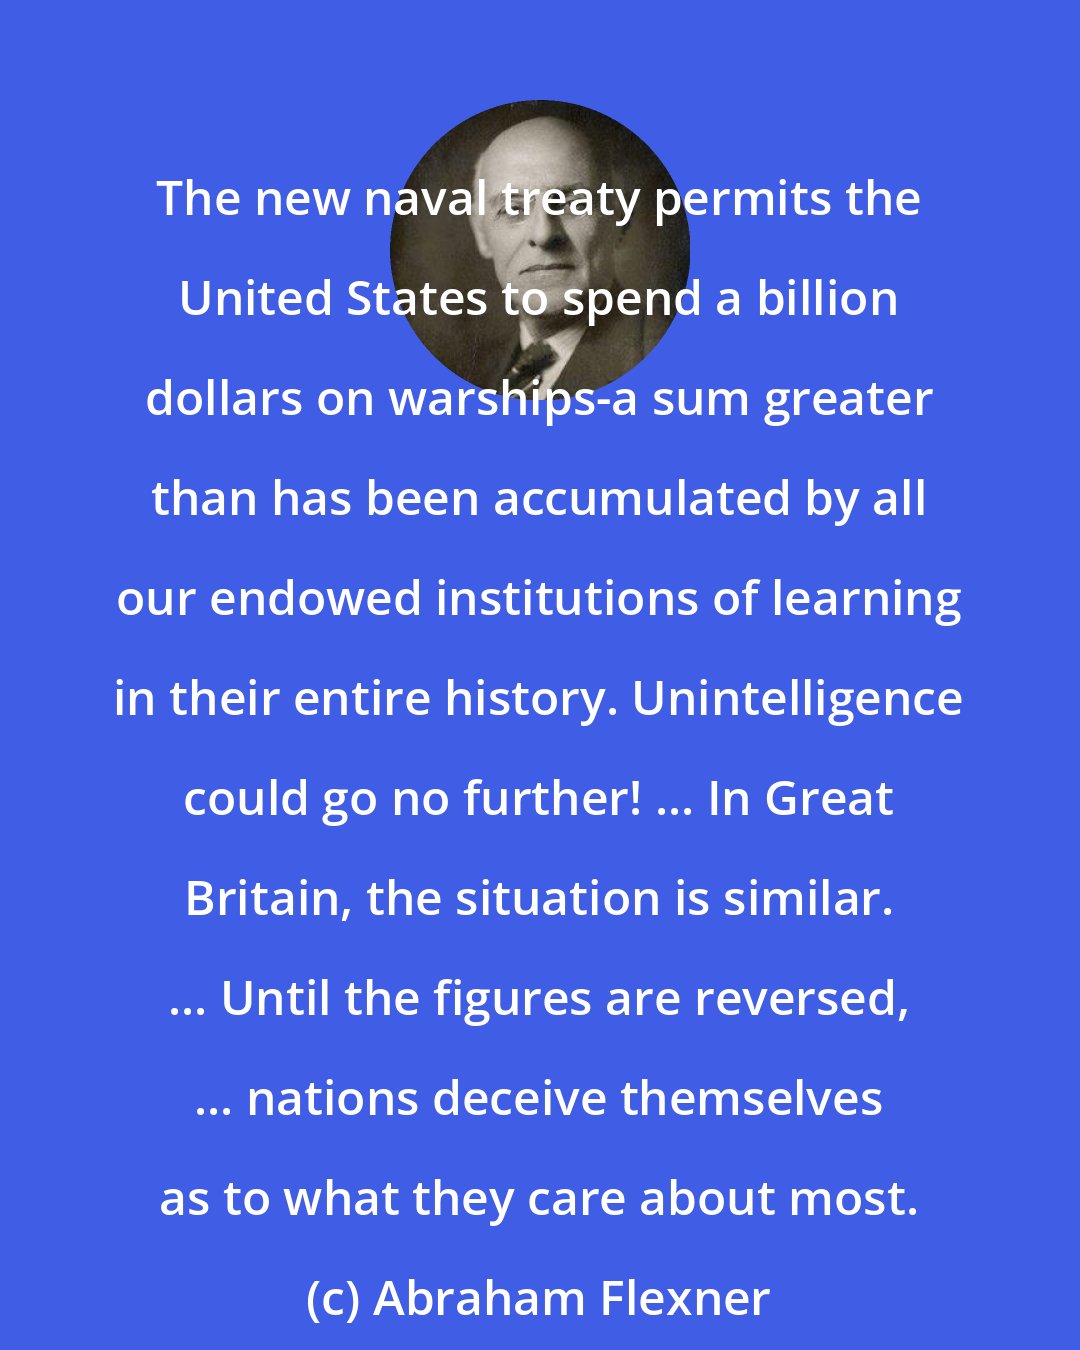 Abraham Flexner: The new naval treaty permits the United States to spend a billion dollars on warships-a sum greater than has been accumulated by all our endowed institutions of learning in their entire history. Unintelligence could go no further! ... In Great Britain, the situation is similar. ... Until the figures are reversed, ... nations deceive themselves as to what they care about most.